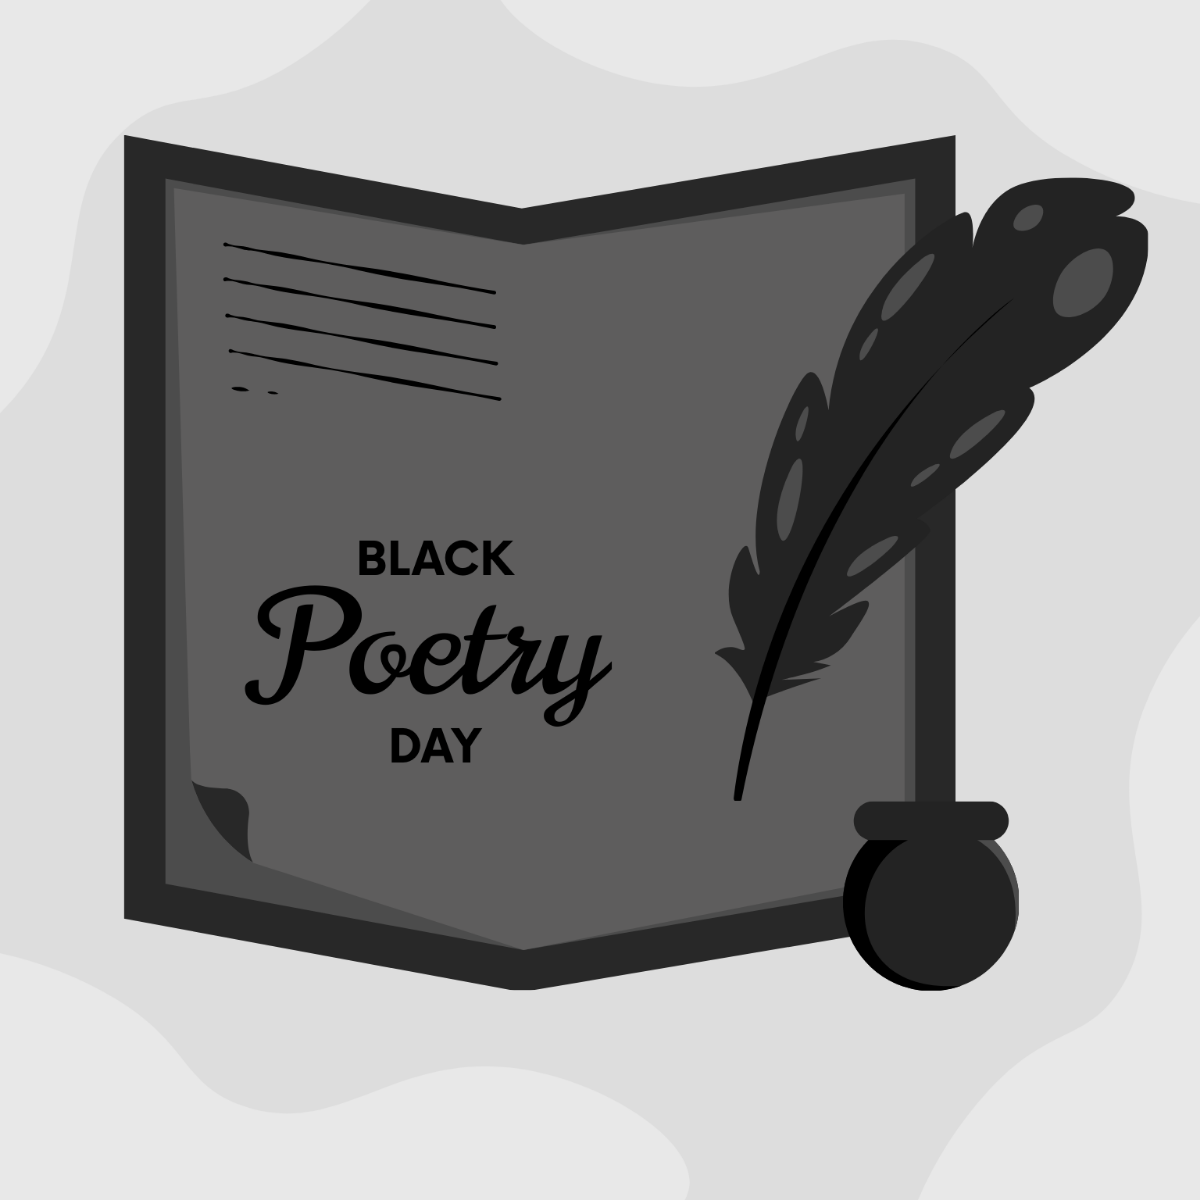 Free Black Poetry Day Illustration Template